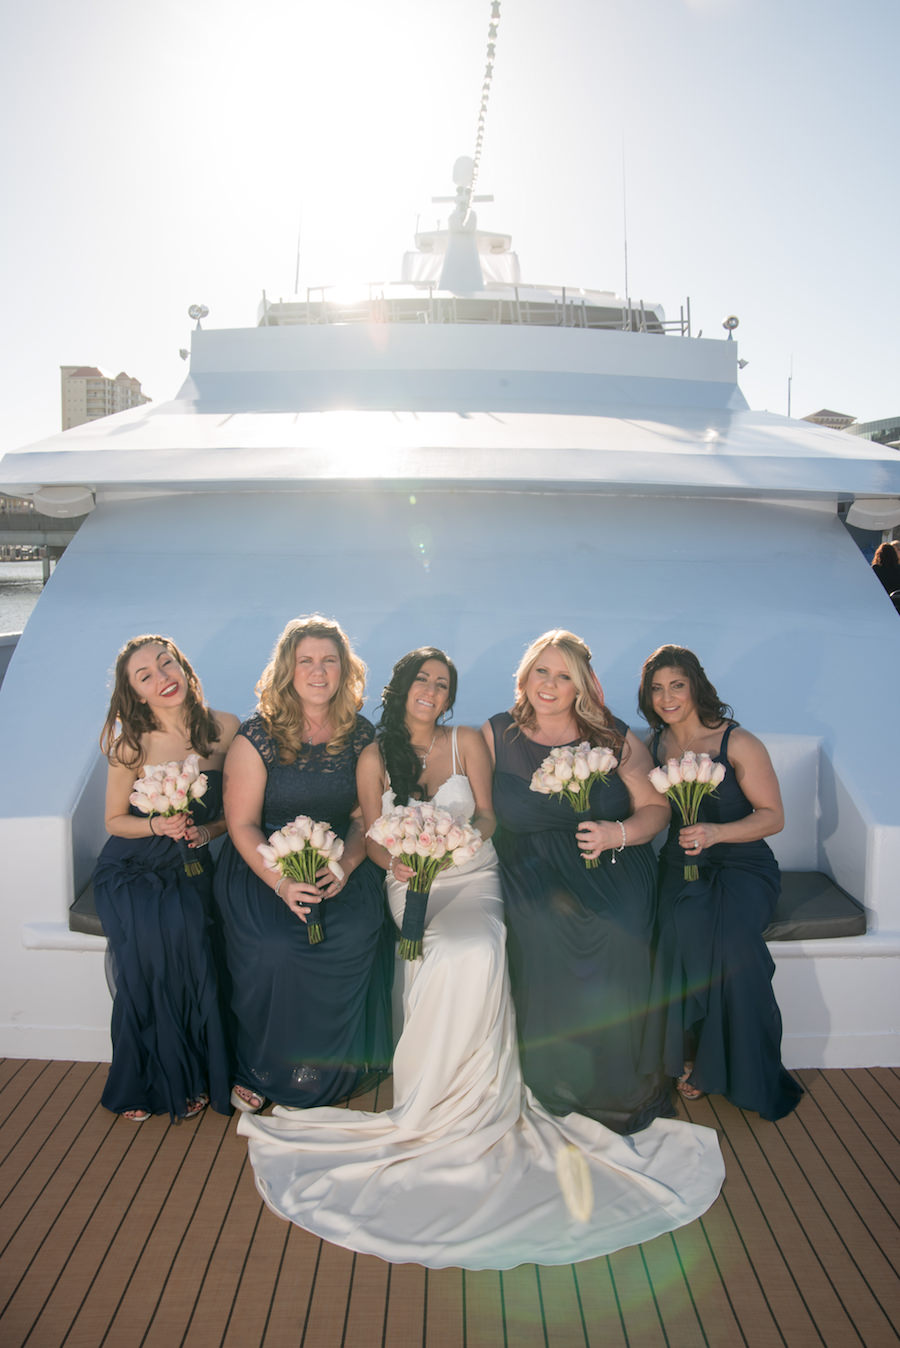 Tampa Bridal Party Wedding Portrait in Navy Bridesmaids Dresses with Ivory Rose Wedding Bouquet and Bride in Ivory Satin Wedding Dress on The Yacht Starship II